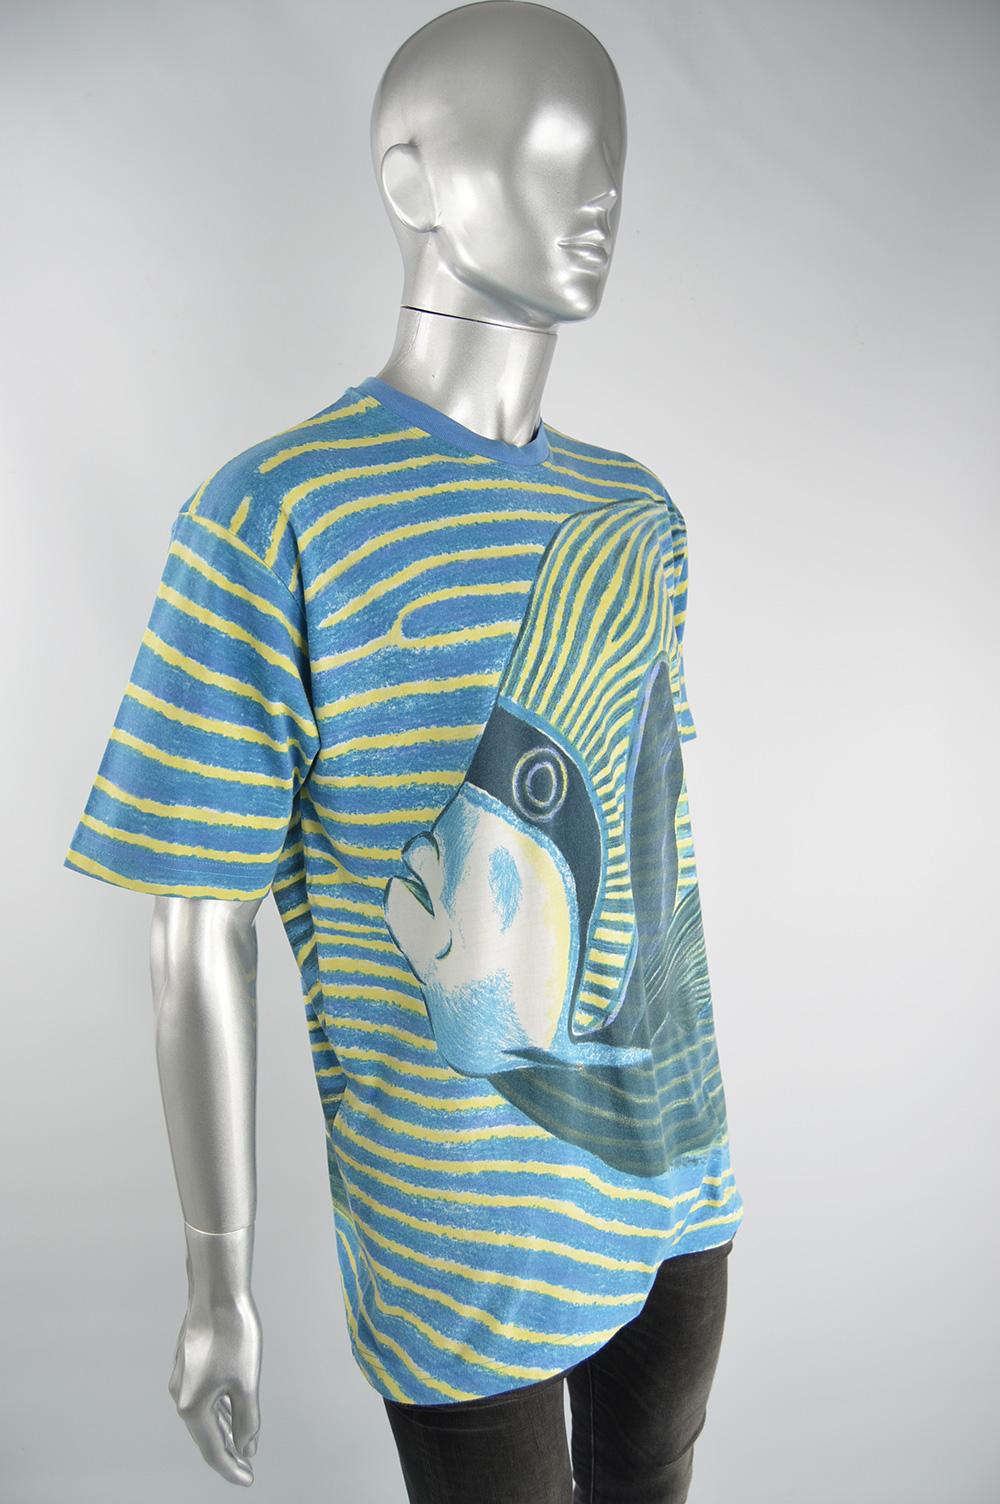 Kenzo Homme Men's Blue & Yellow Cotton Vintage Fish Print Striped T Shirt, 1990s In Excellent Condition For Sale In Doncaster, South Yorkshire